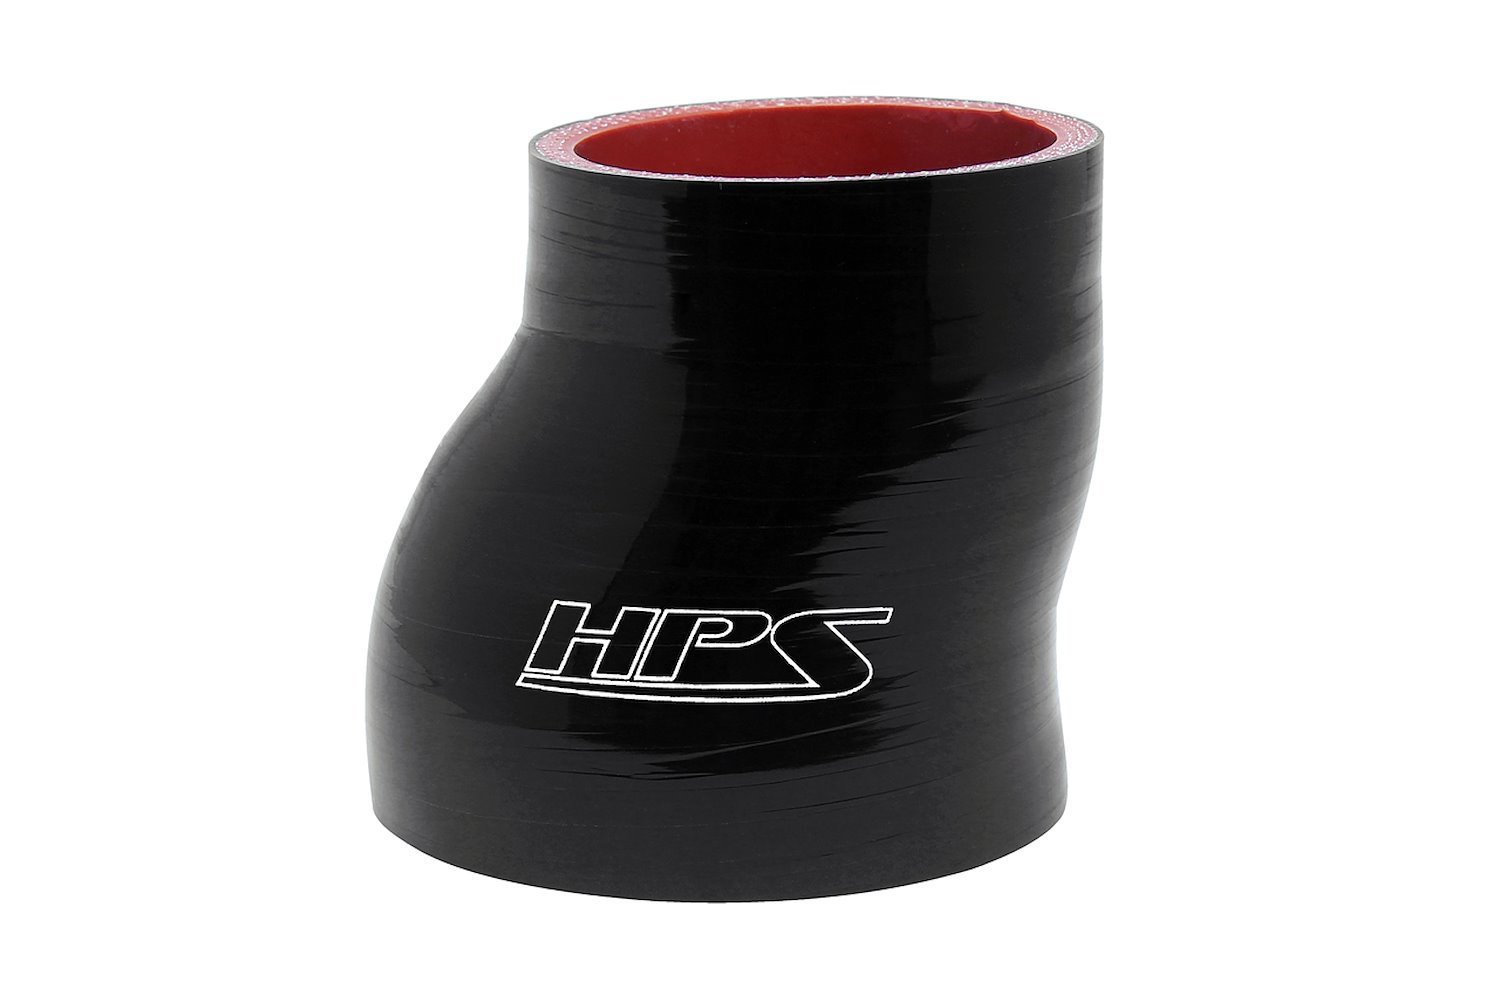 HTSOR-225-300-BLK Silicone Offset Reducer Hose, High-Temp Reinforced, 2-1/4 in. - 3 in. ID, 3 in. Long, Black